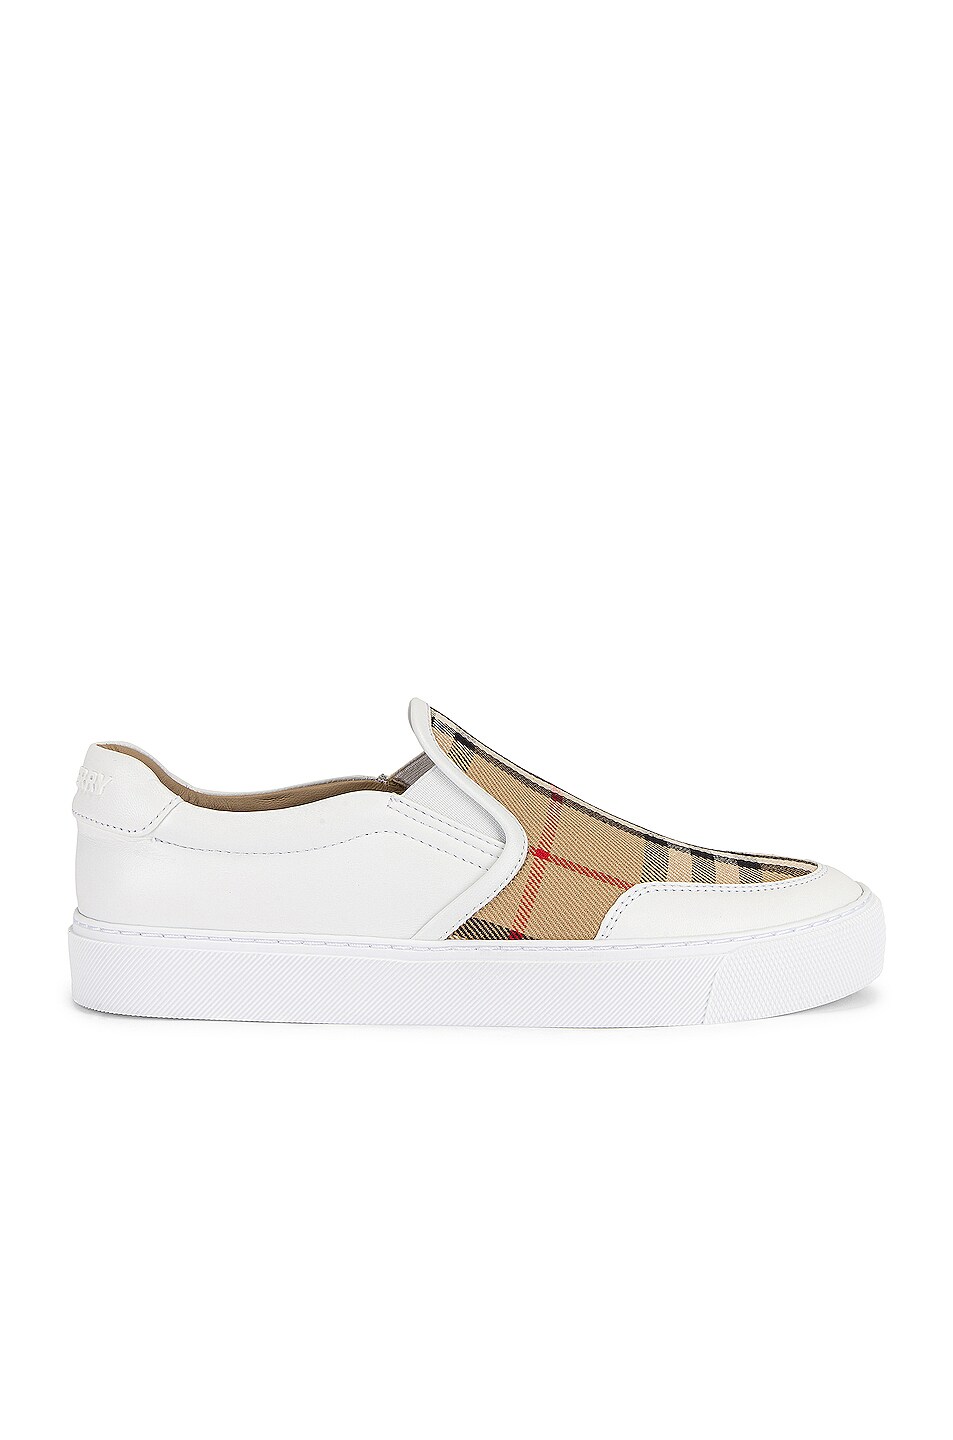 Image 1 of Burberry Salmond Low Top Sneakers in White & Archive